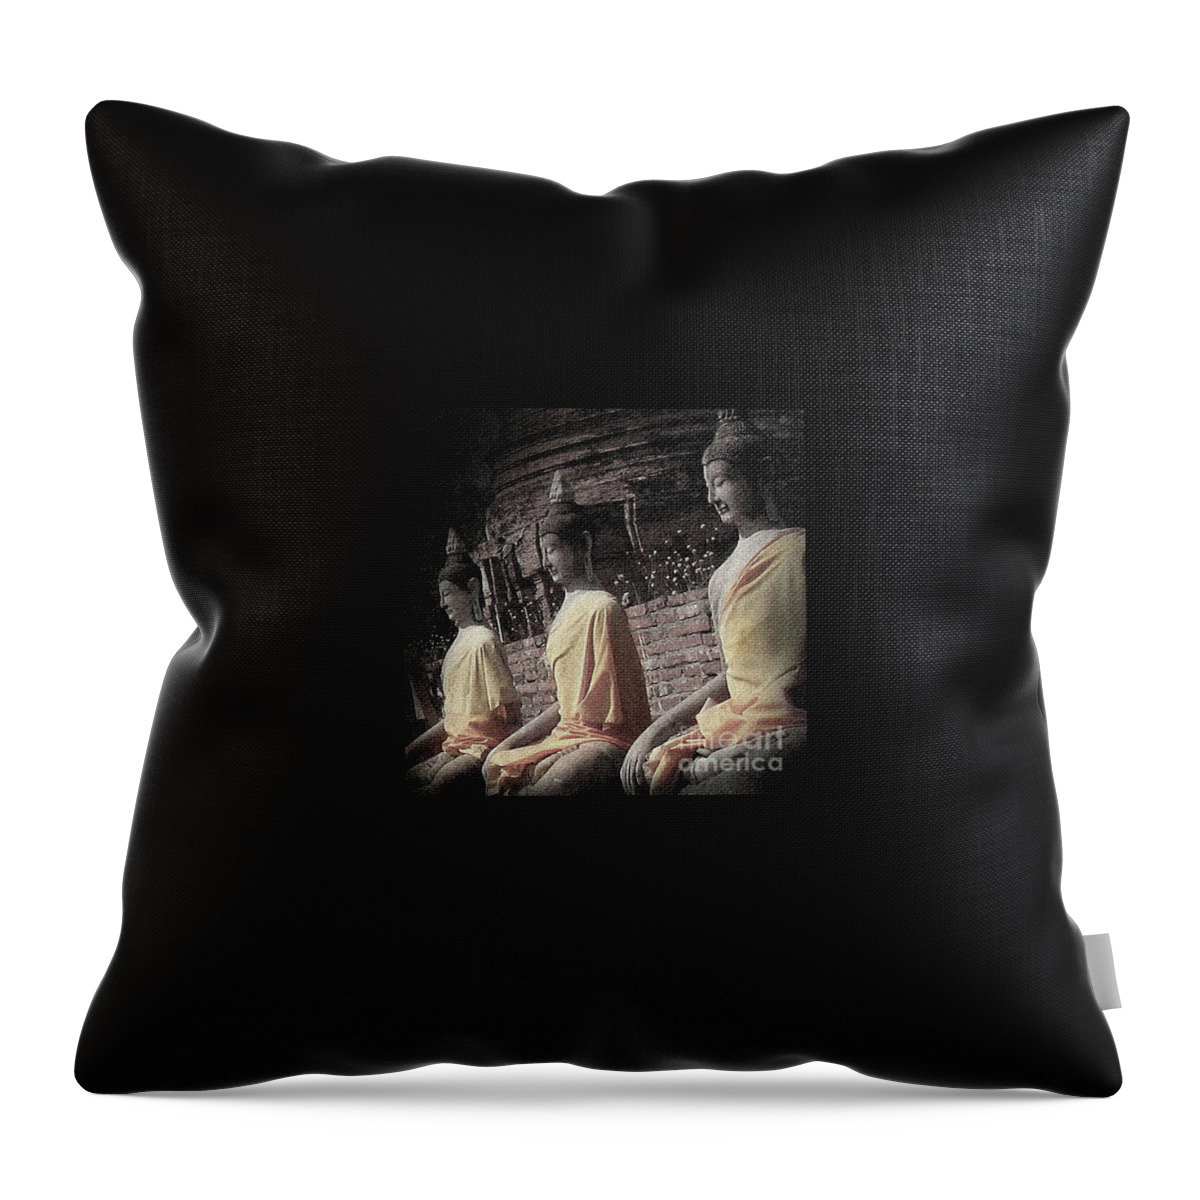 Peace Throw Pillow featuring the photograph Ancient Buddha Statues by Eena Bo